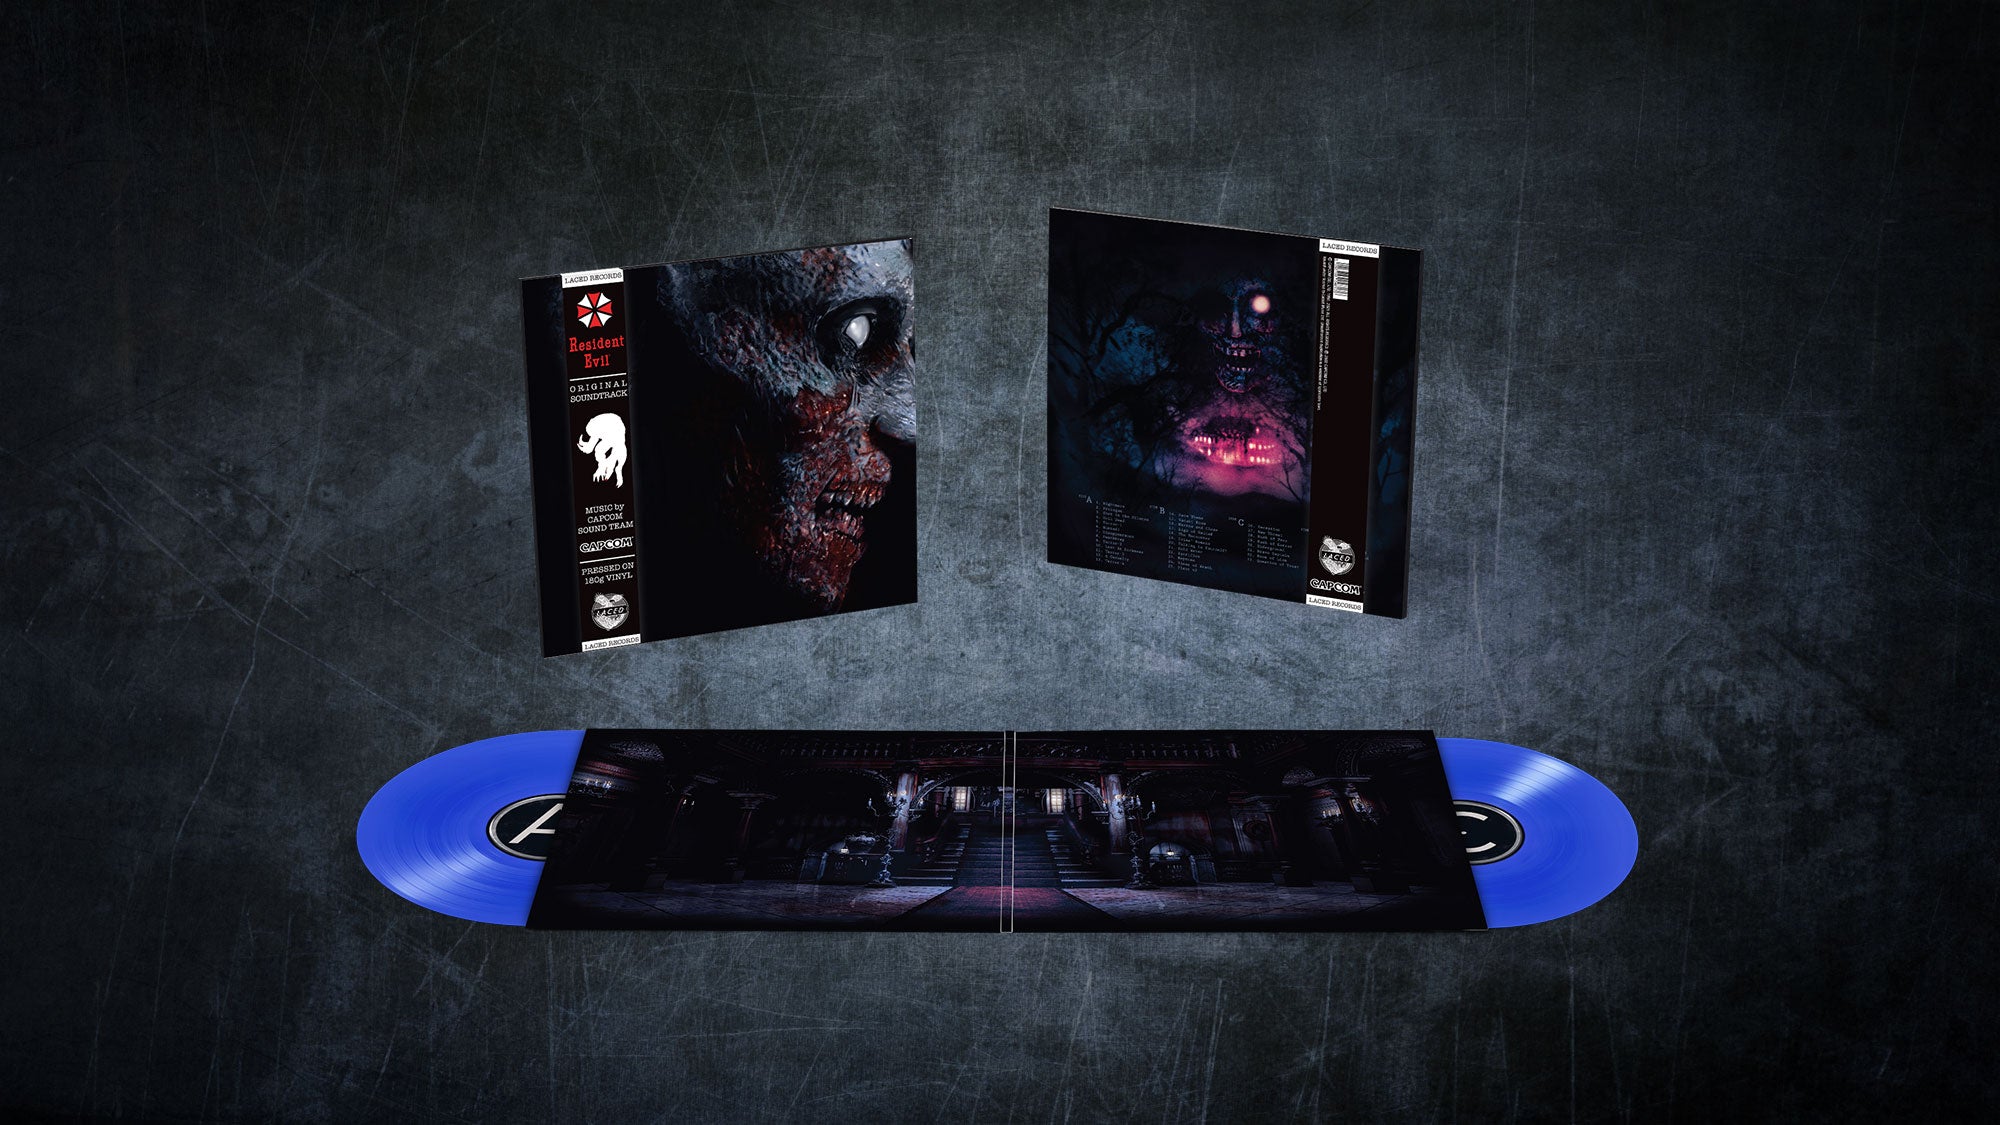 The Resident Evil (2002) Limited Edition vinyl